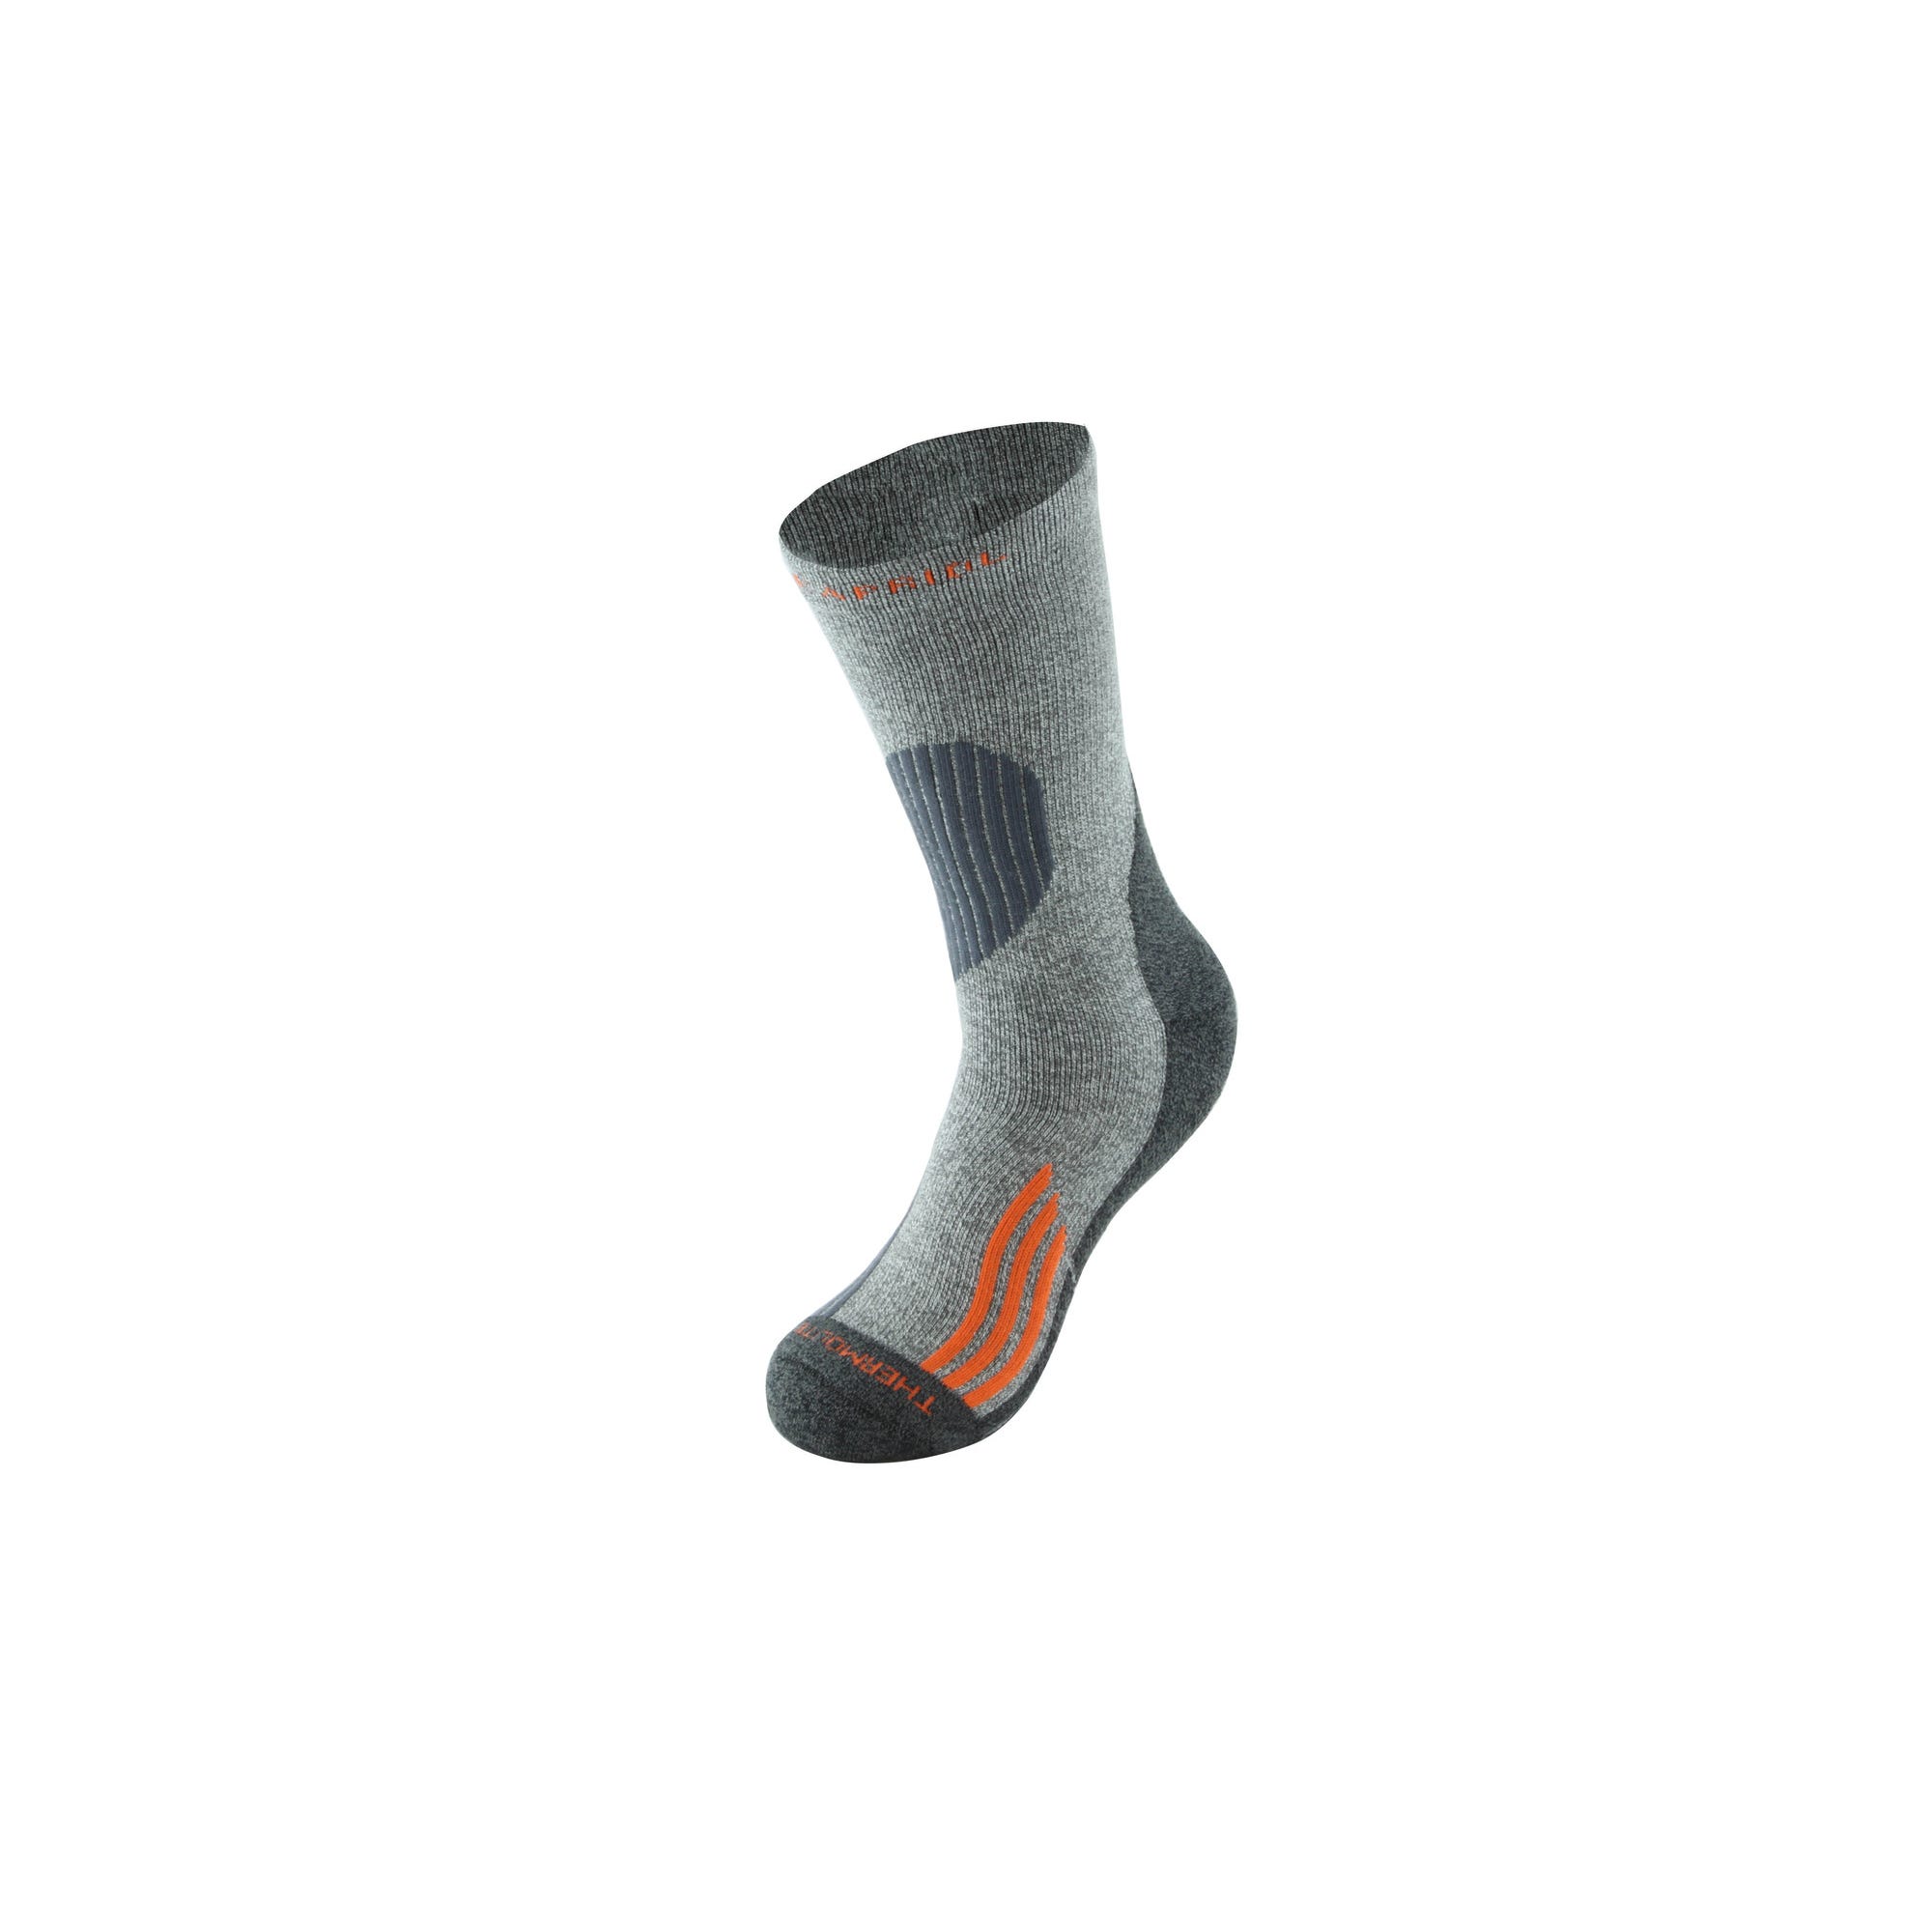 Chaussette thermo confort T.45 - 47 - KAPRIOL 0